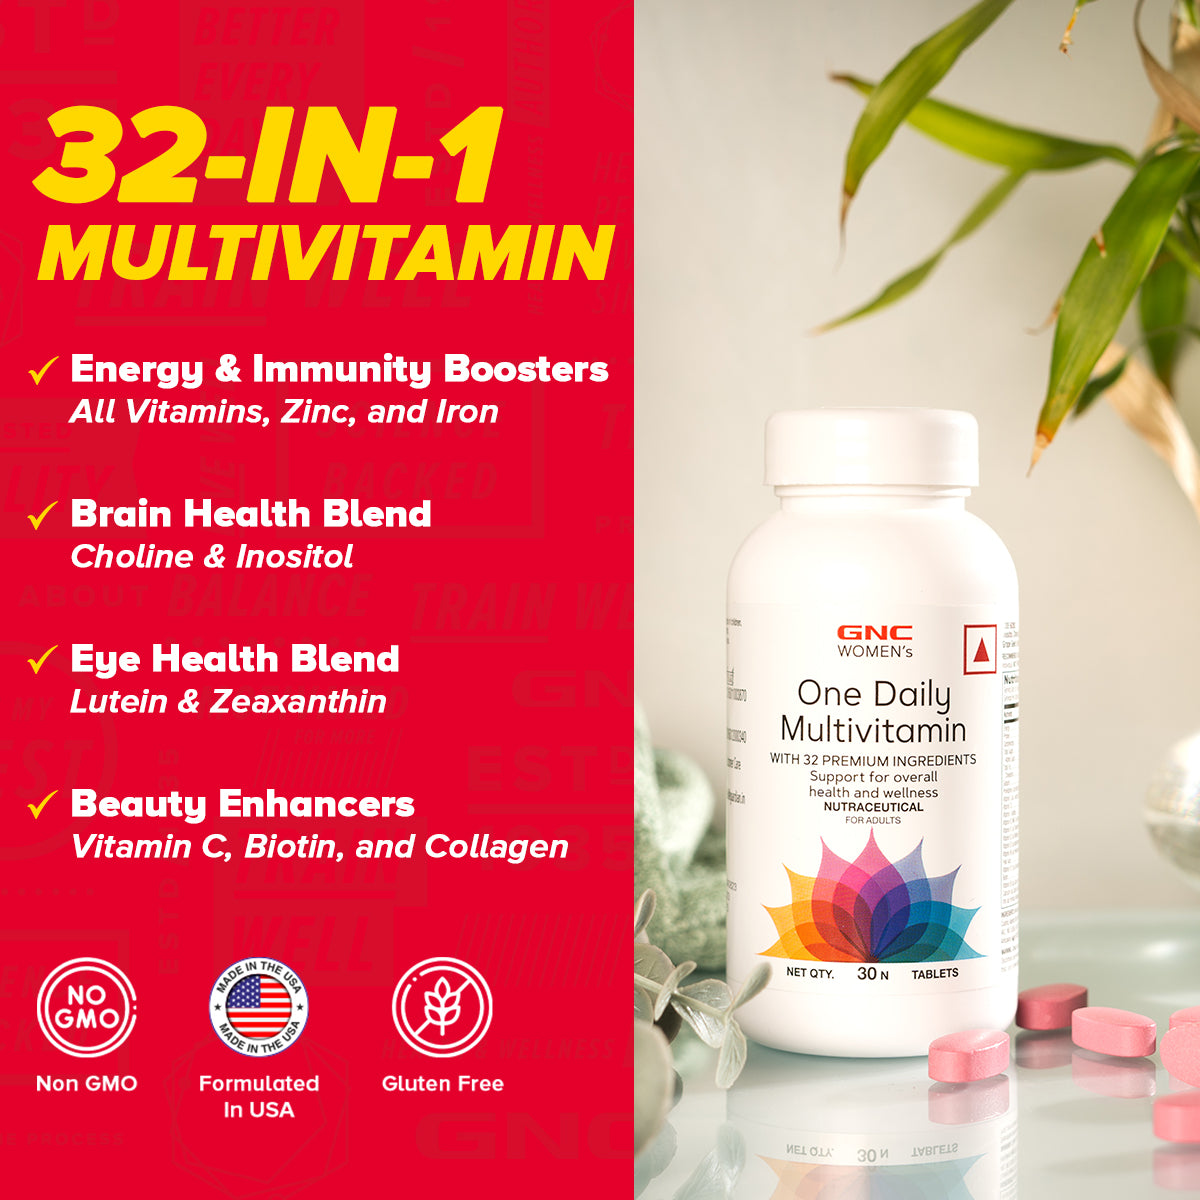 GNC Womens One Daily Multivitamin - Improves Energy, Immunity, Skin and Overall Health